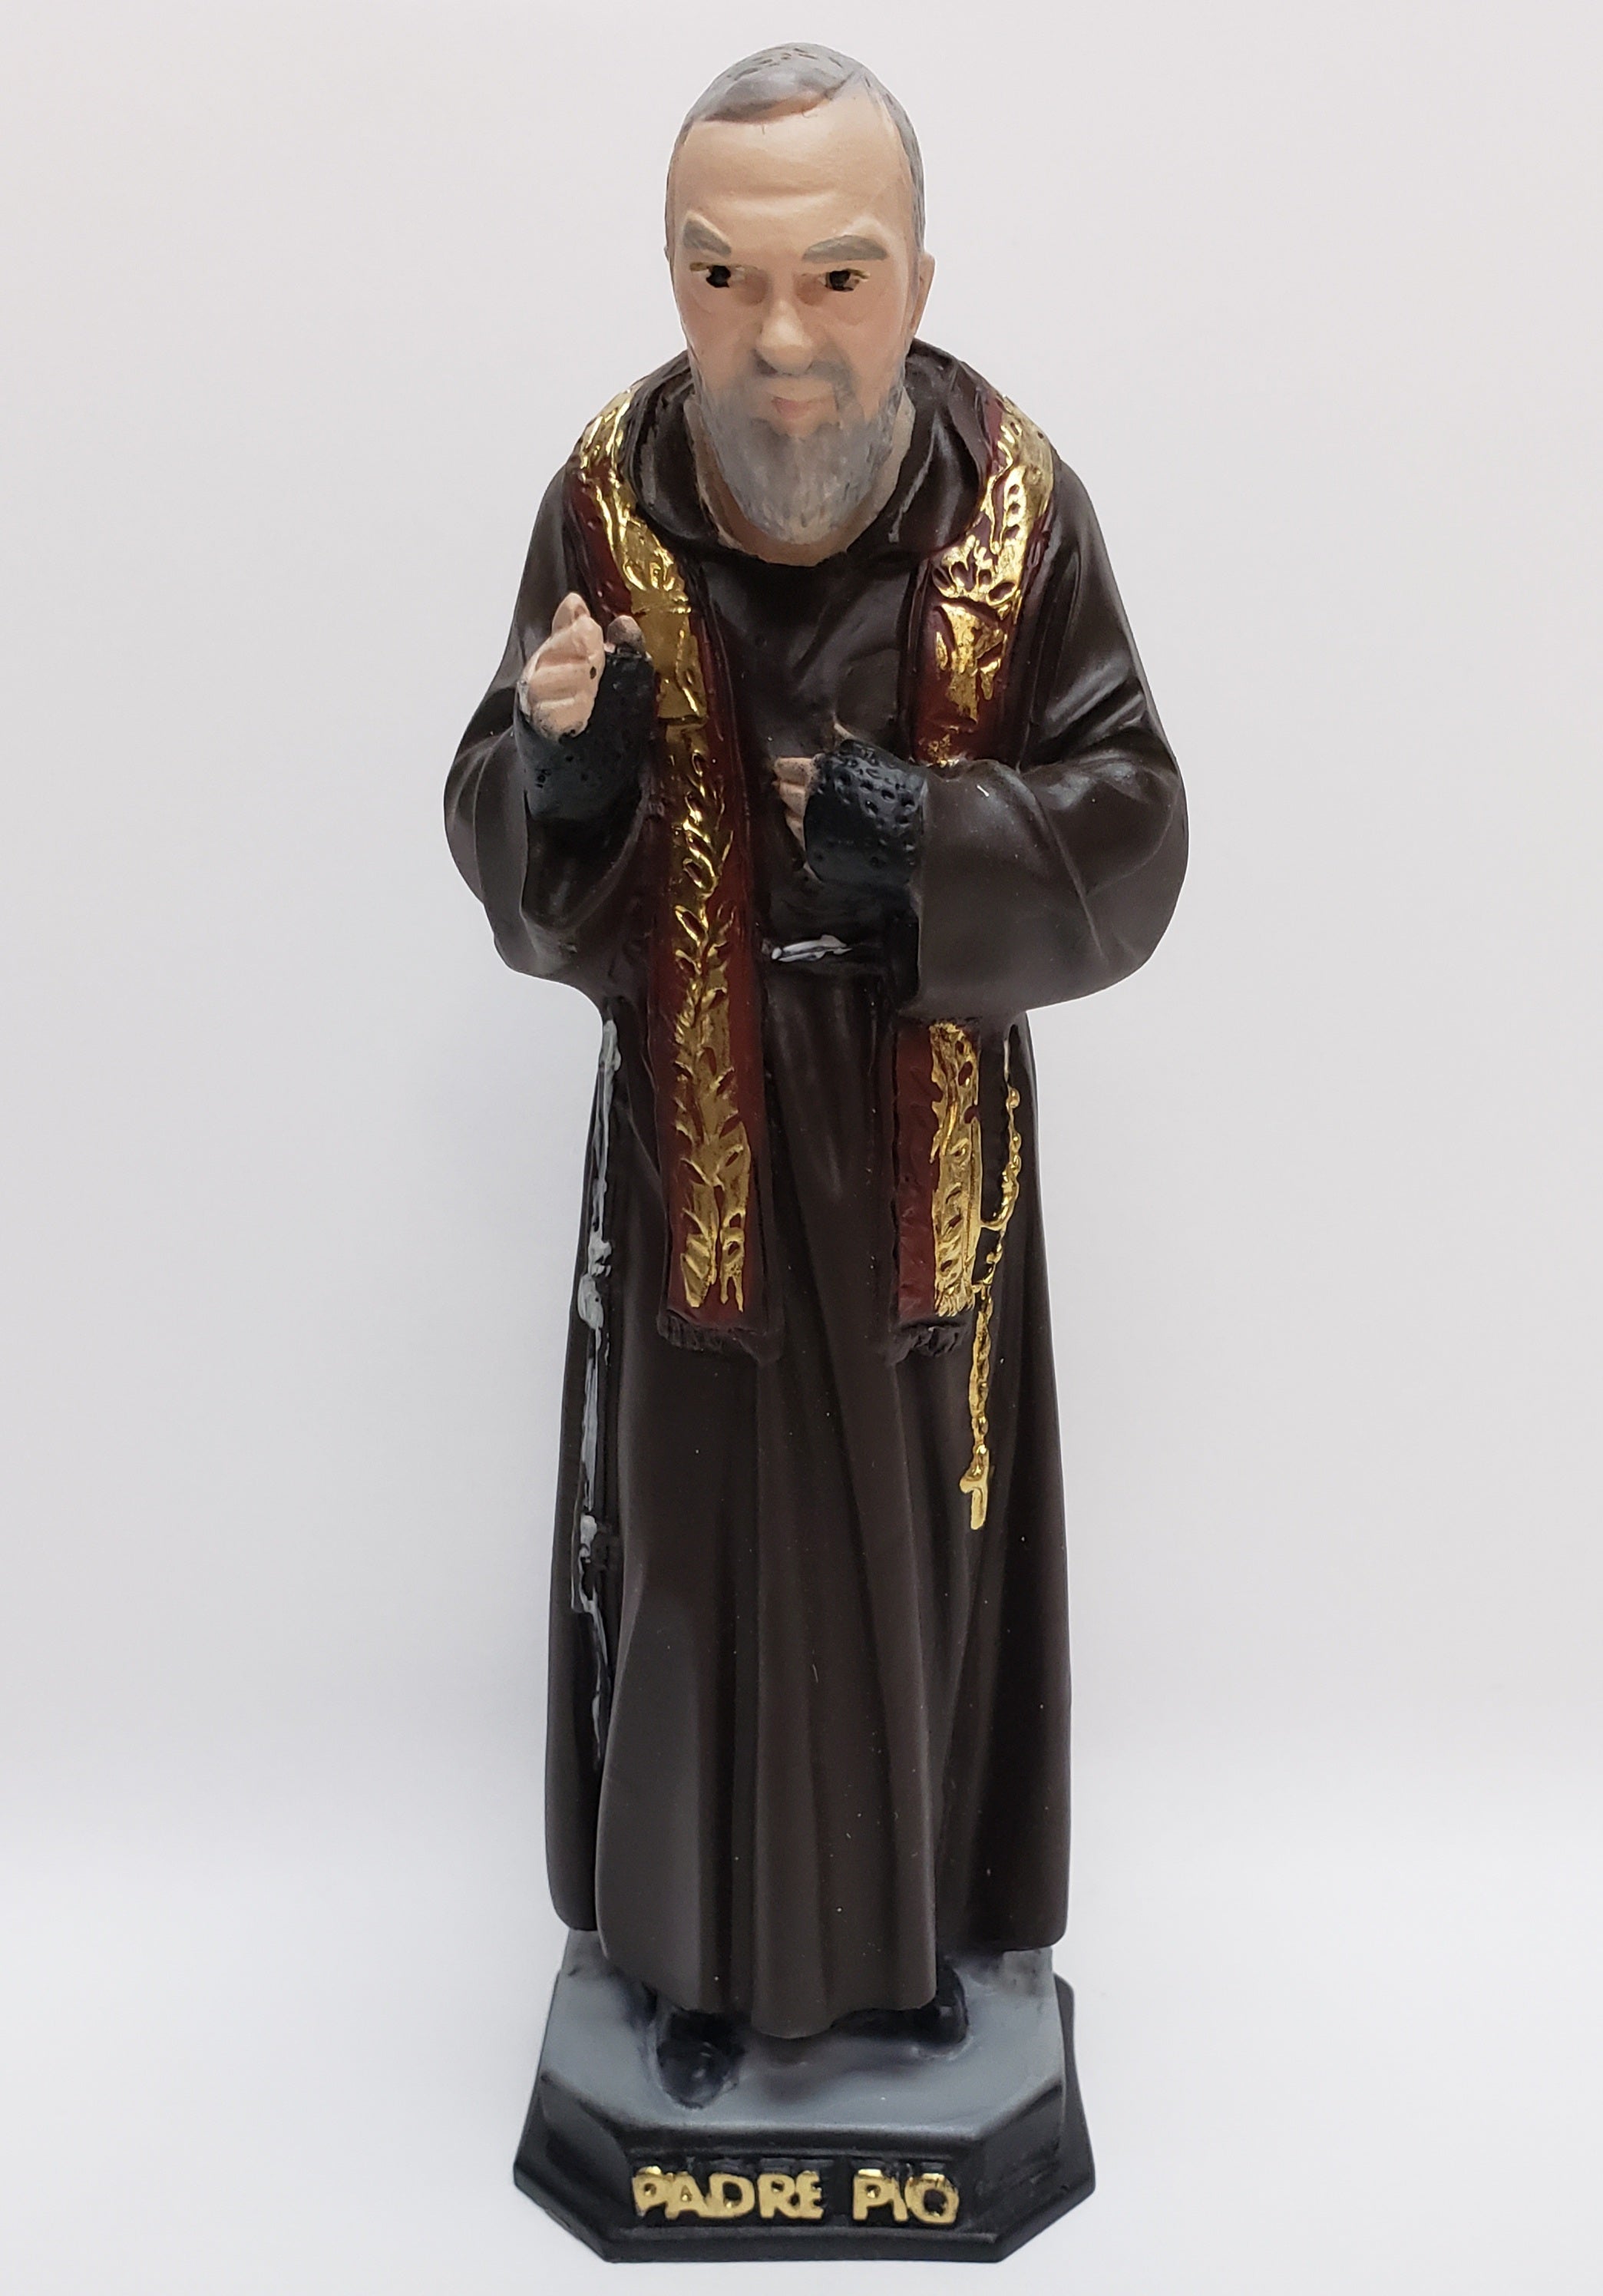 The Faith Gift Shop Saint Father Pio statue - Hand Painted in Italy - Our Tuscany Collection   / San  Padre Pio